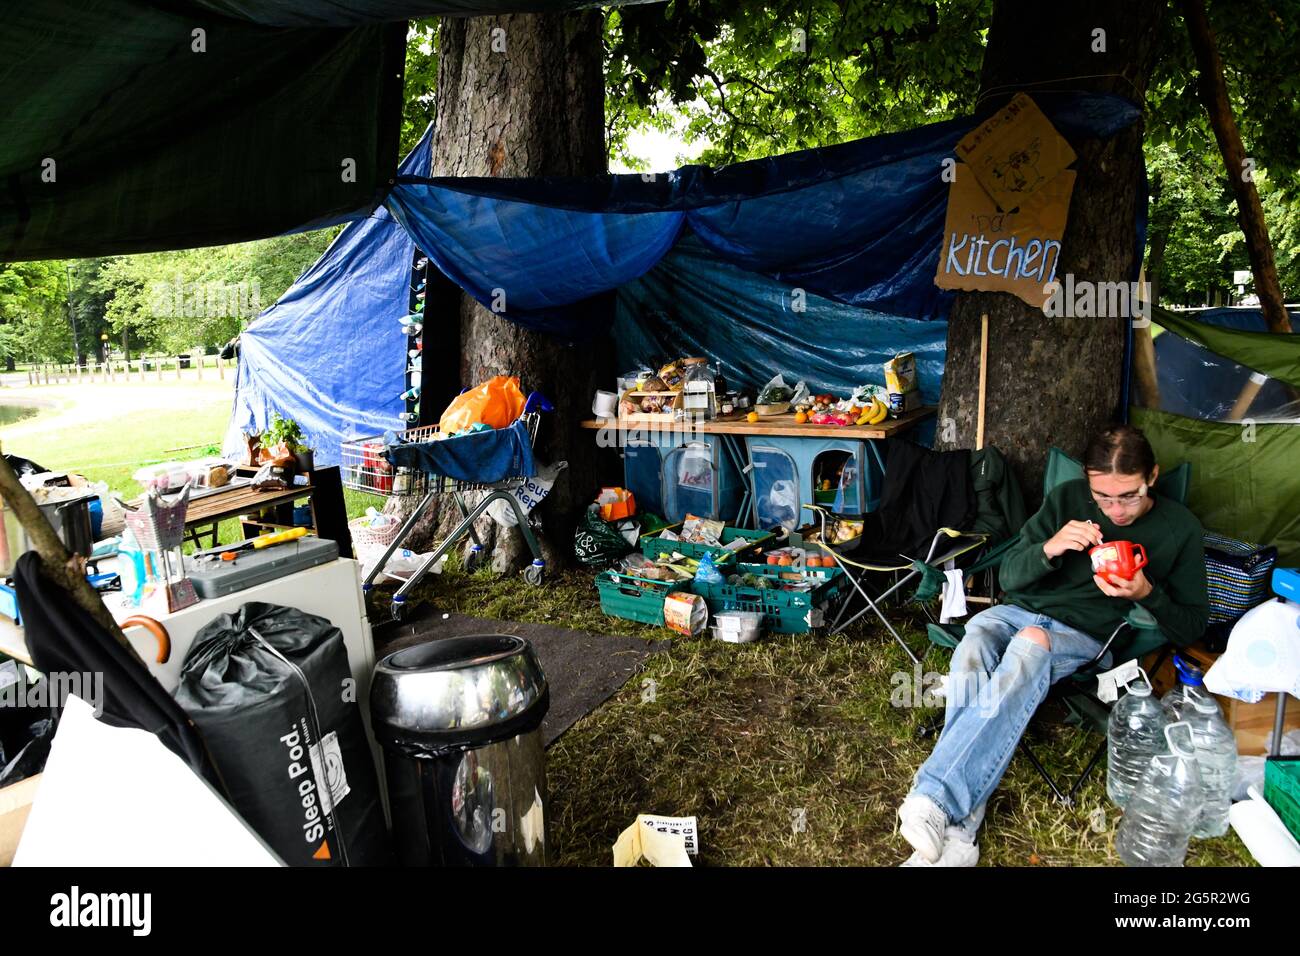 London, UK, 29 June 2021, Forty camping tents in Clapham Common are calling on the UK government to repeal the Coronavirus Act It hurts seniors and the NHS, We are here to reclaim our communities, Lockdown is an impediment to our freedom on 29 June 2021 in London, UK. Stock Photo